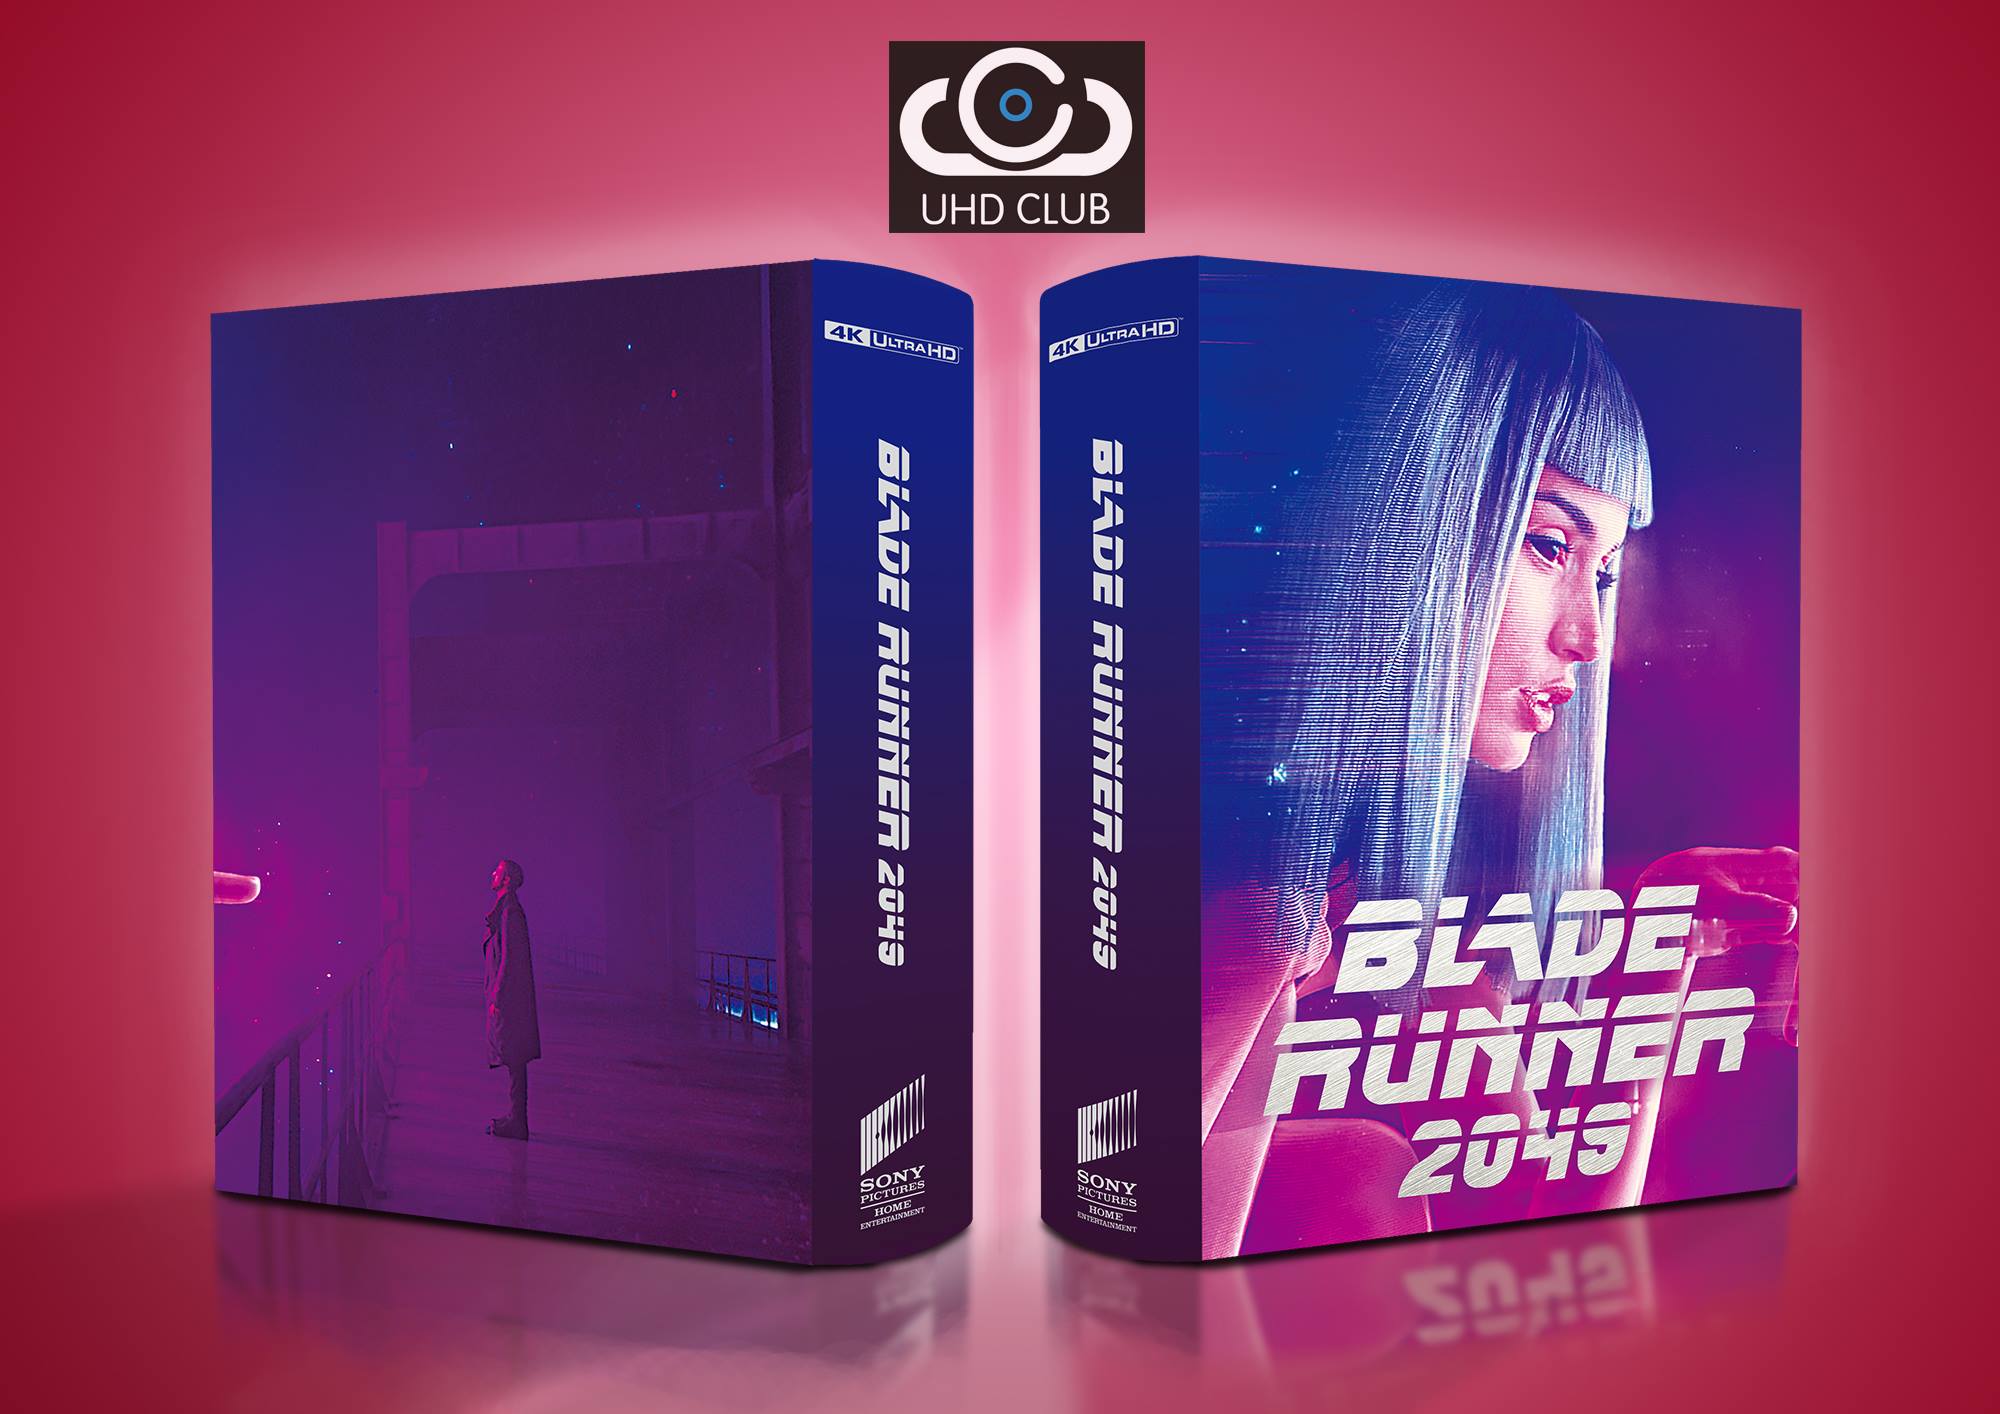 Blade Runner 2049 (Blu-ray Wooden Collector's Set) (UHD Club